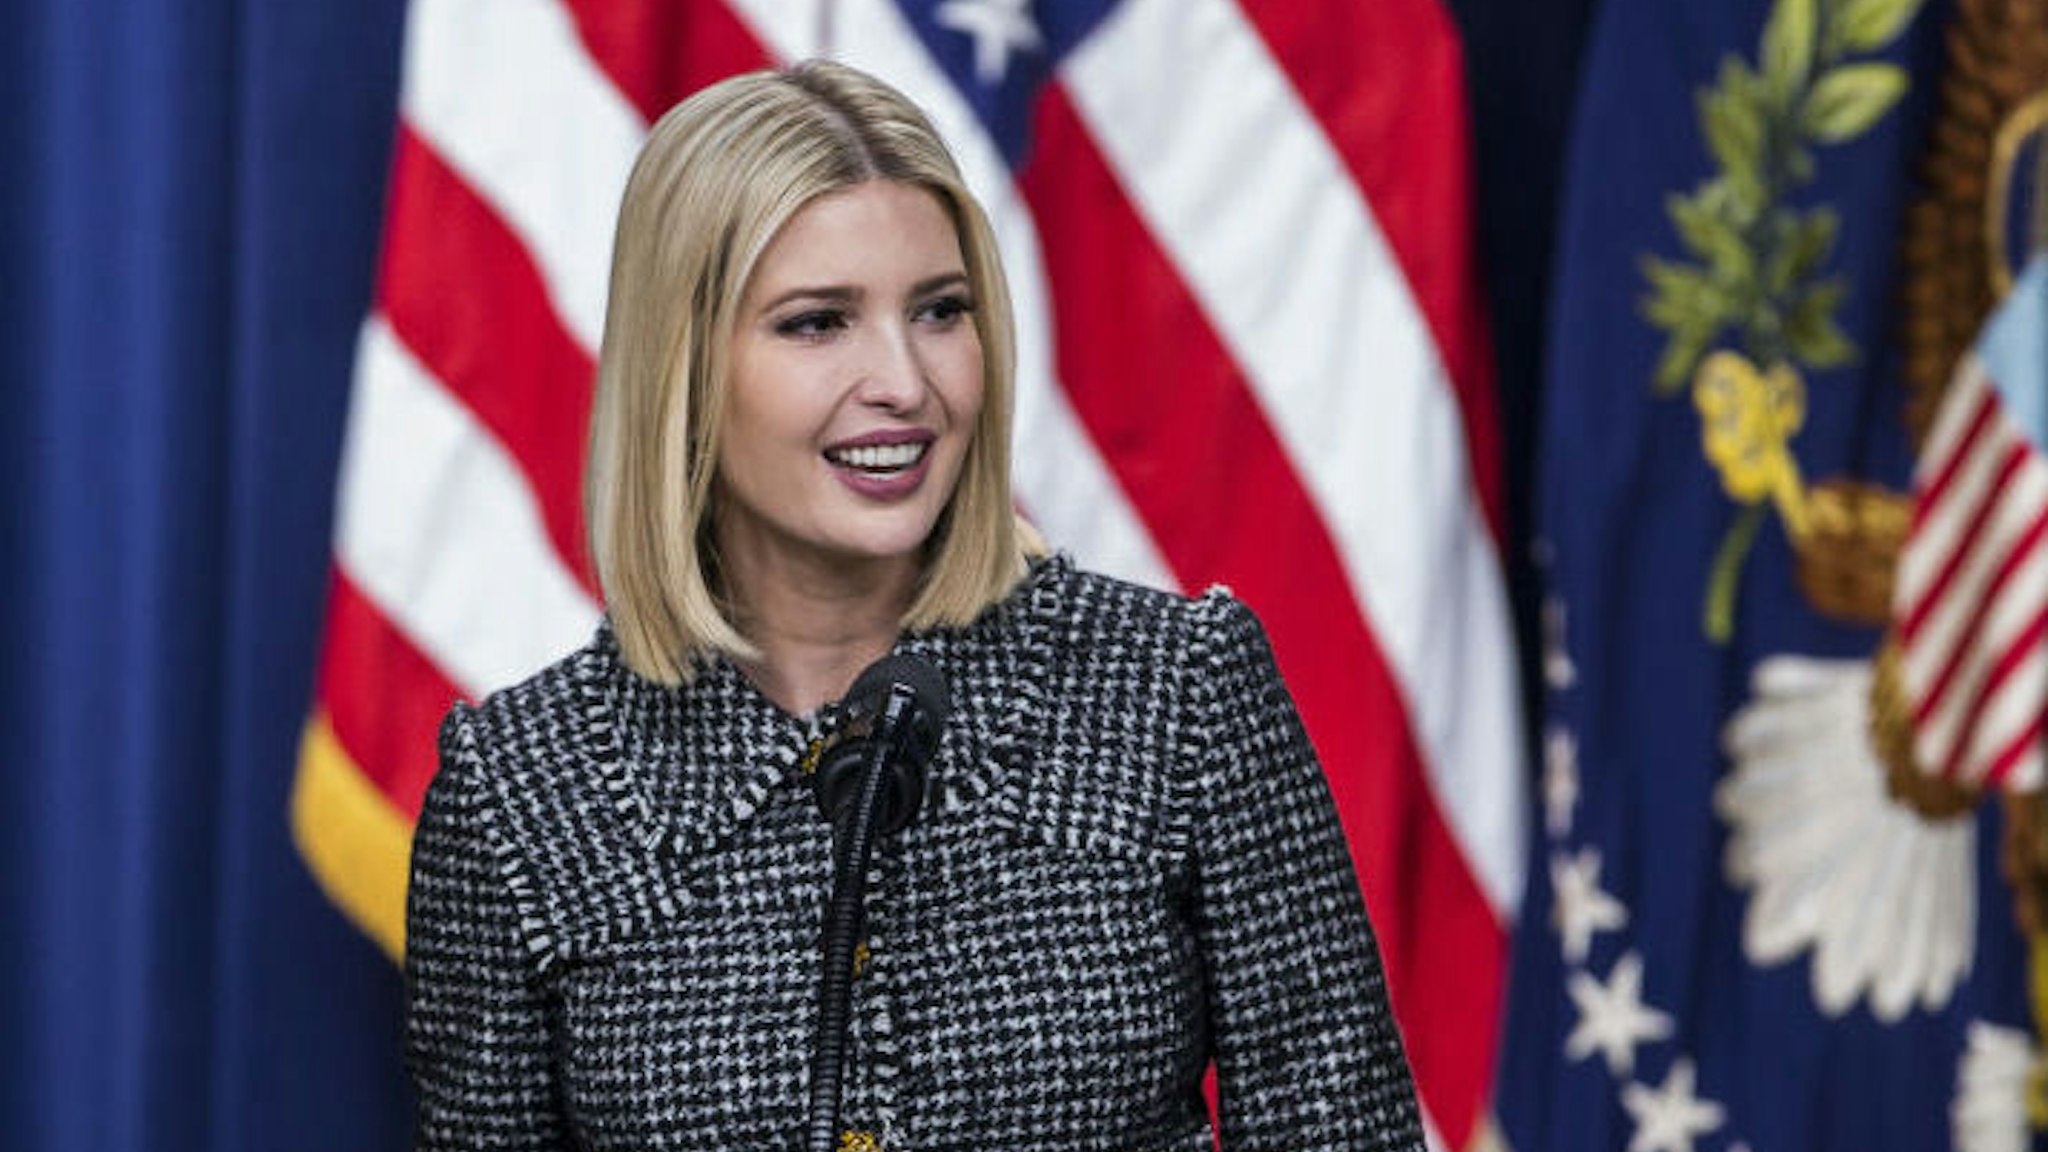 Ivanka Trump, senior adviser to U.S. President Donald Trump, speaks during the White House Summit on Child Care and Paid Leave at the Eisenhower Executive Office Building in Washington, D.C., U.S., on Thursday, Dec. 12, 2019. Trump said that he was "thrilled" that lawmakers have introduced "really strong, bipartisan legislation" for paid family leave. Photographer: Zach Gibson/Bloomberg